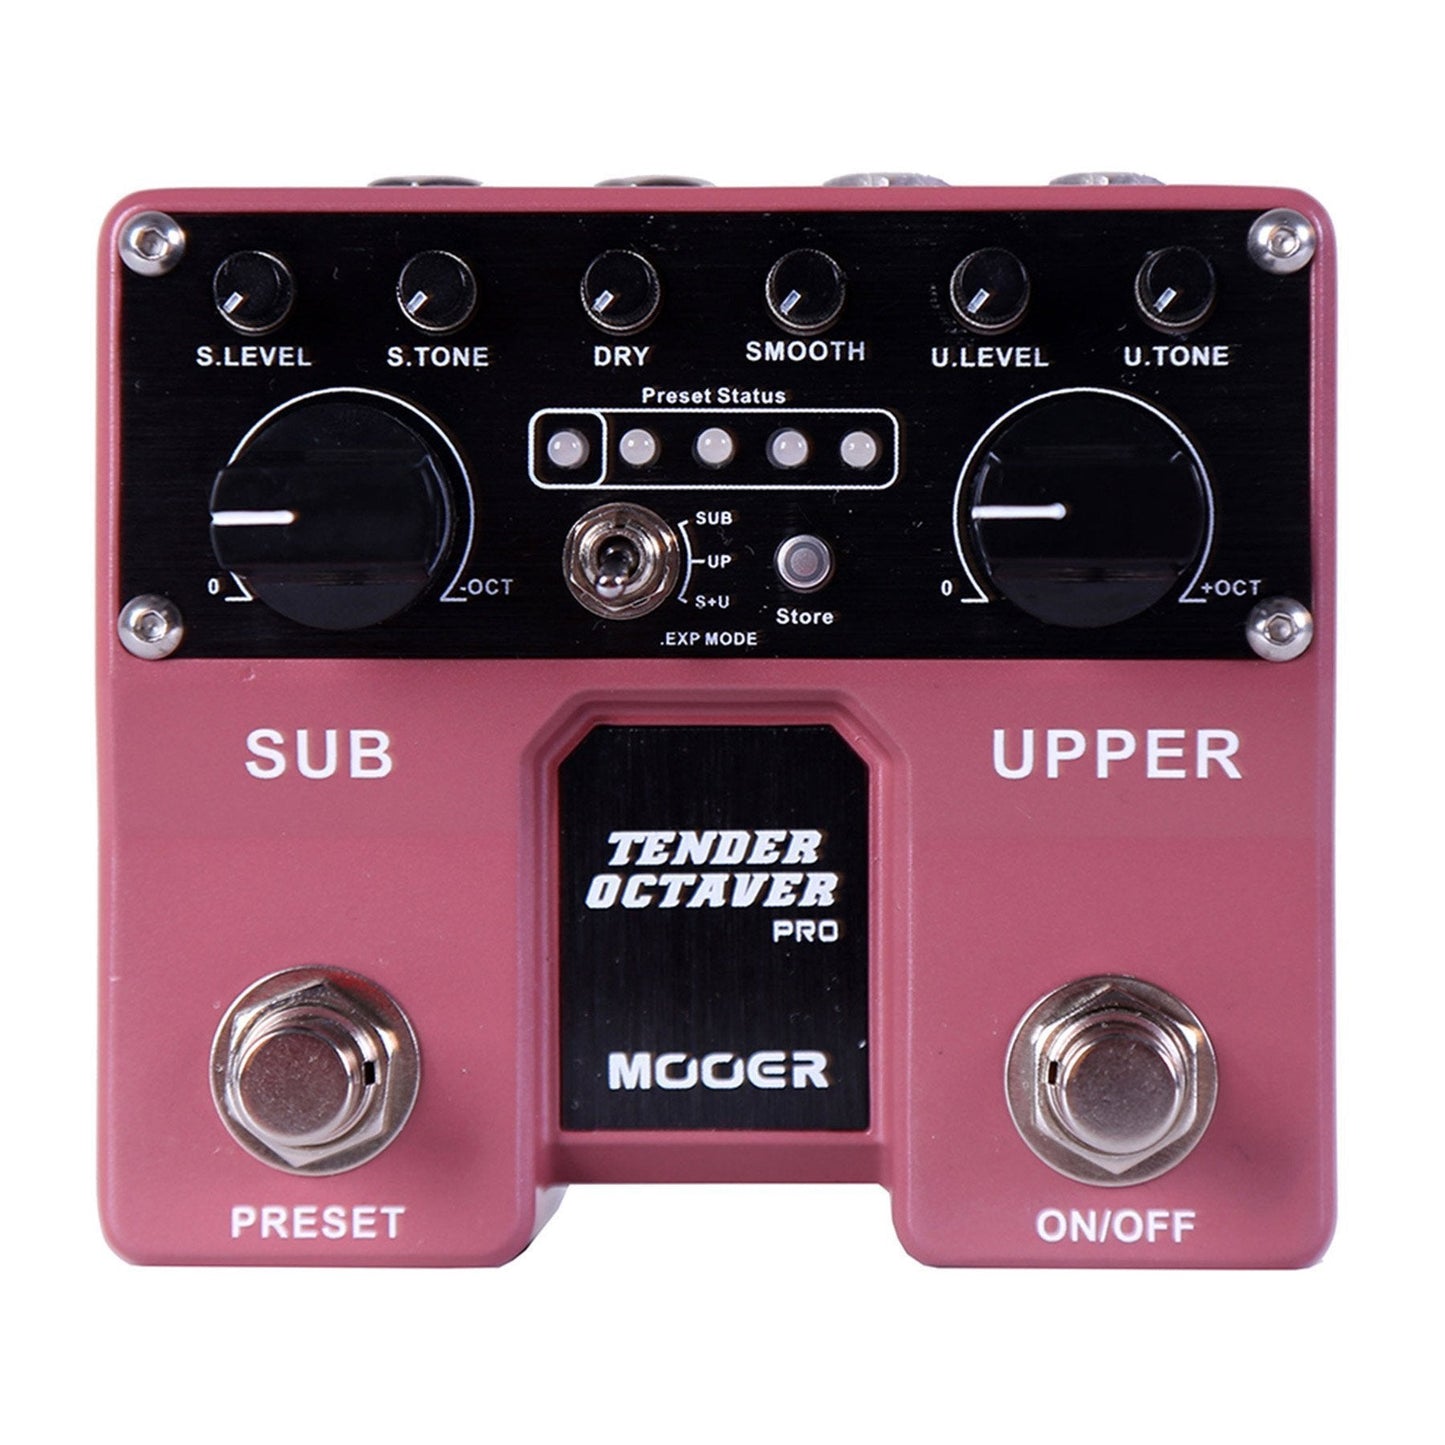 Mooer Tender Octaver Pro Octave Dual Guitar Effects Pedal